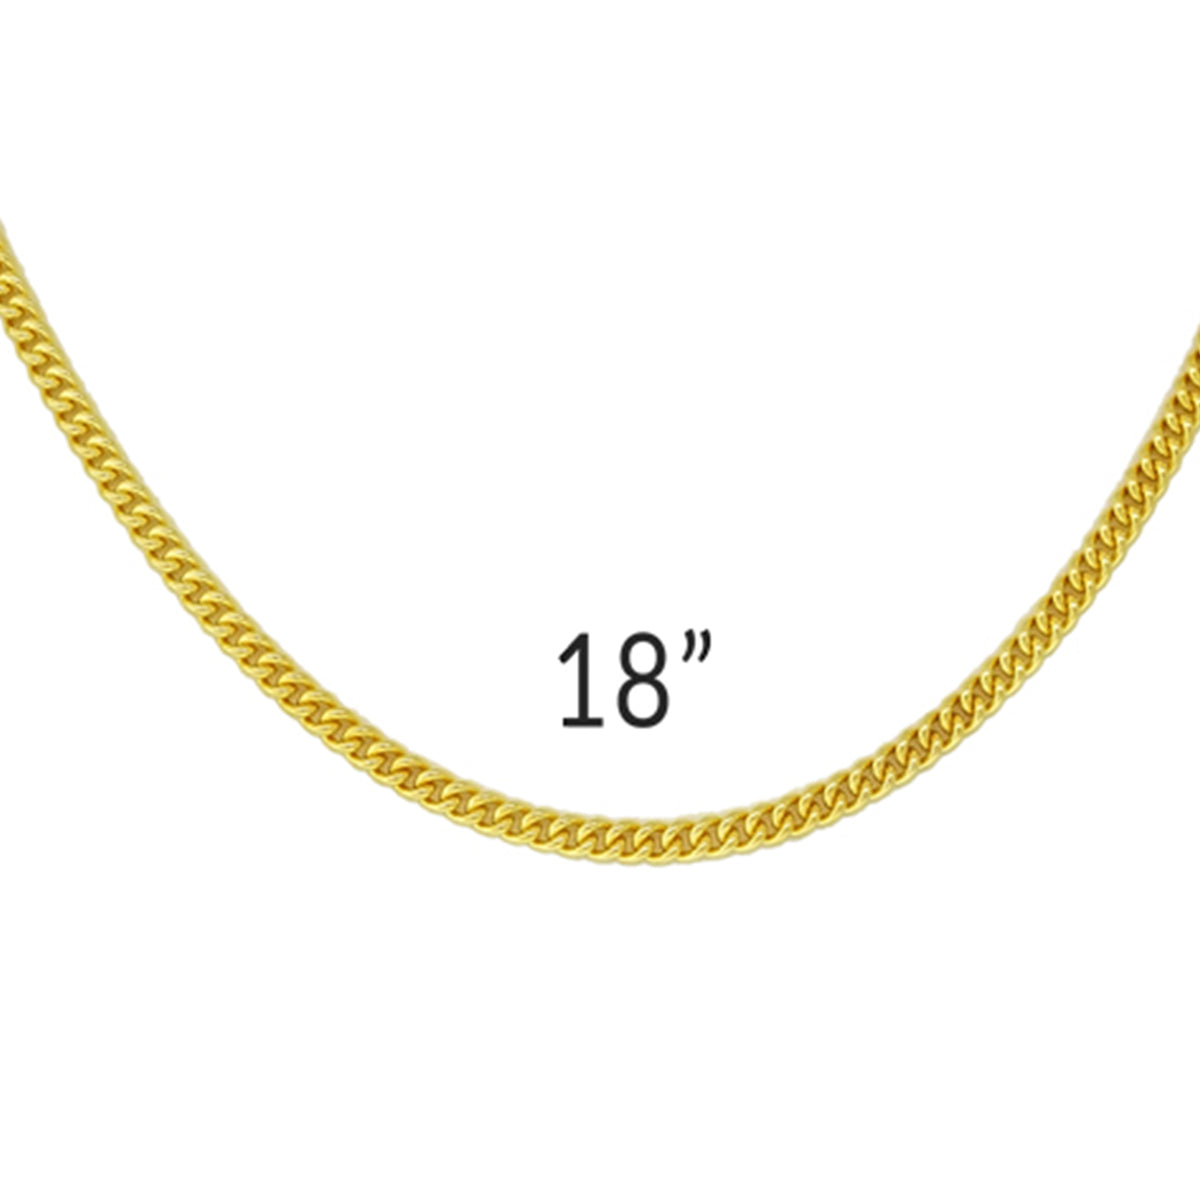 Ritzy Couture DeLuxe Luxury Necklace Chains For Charms - 22k Gold Plating